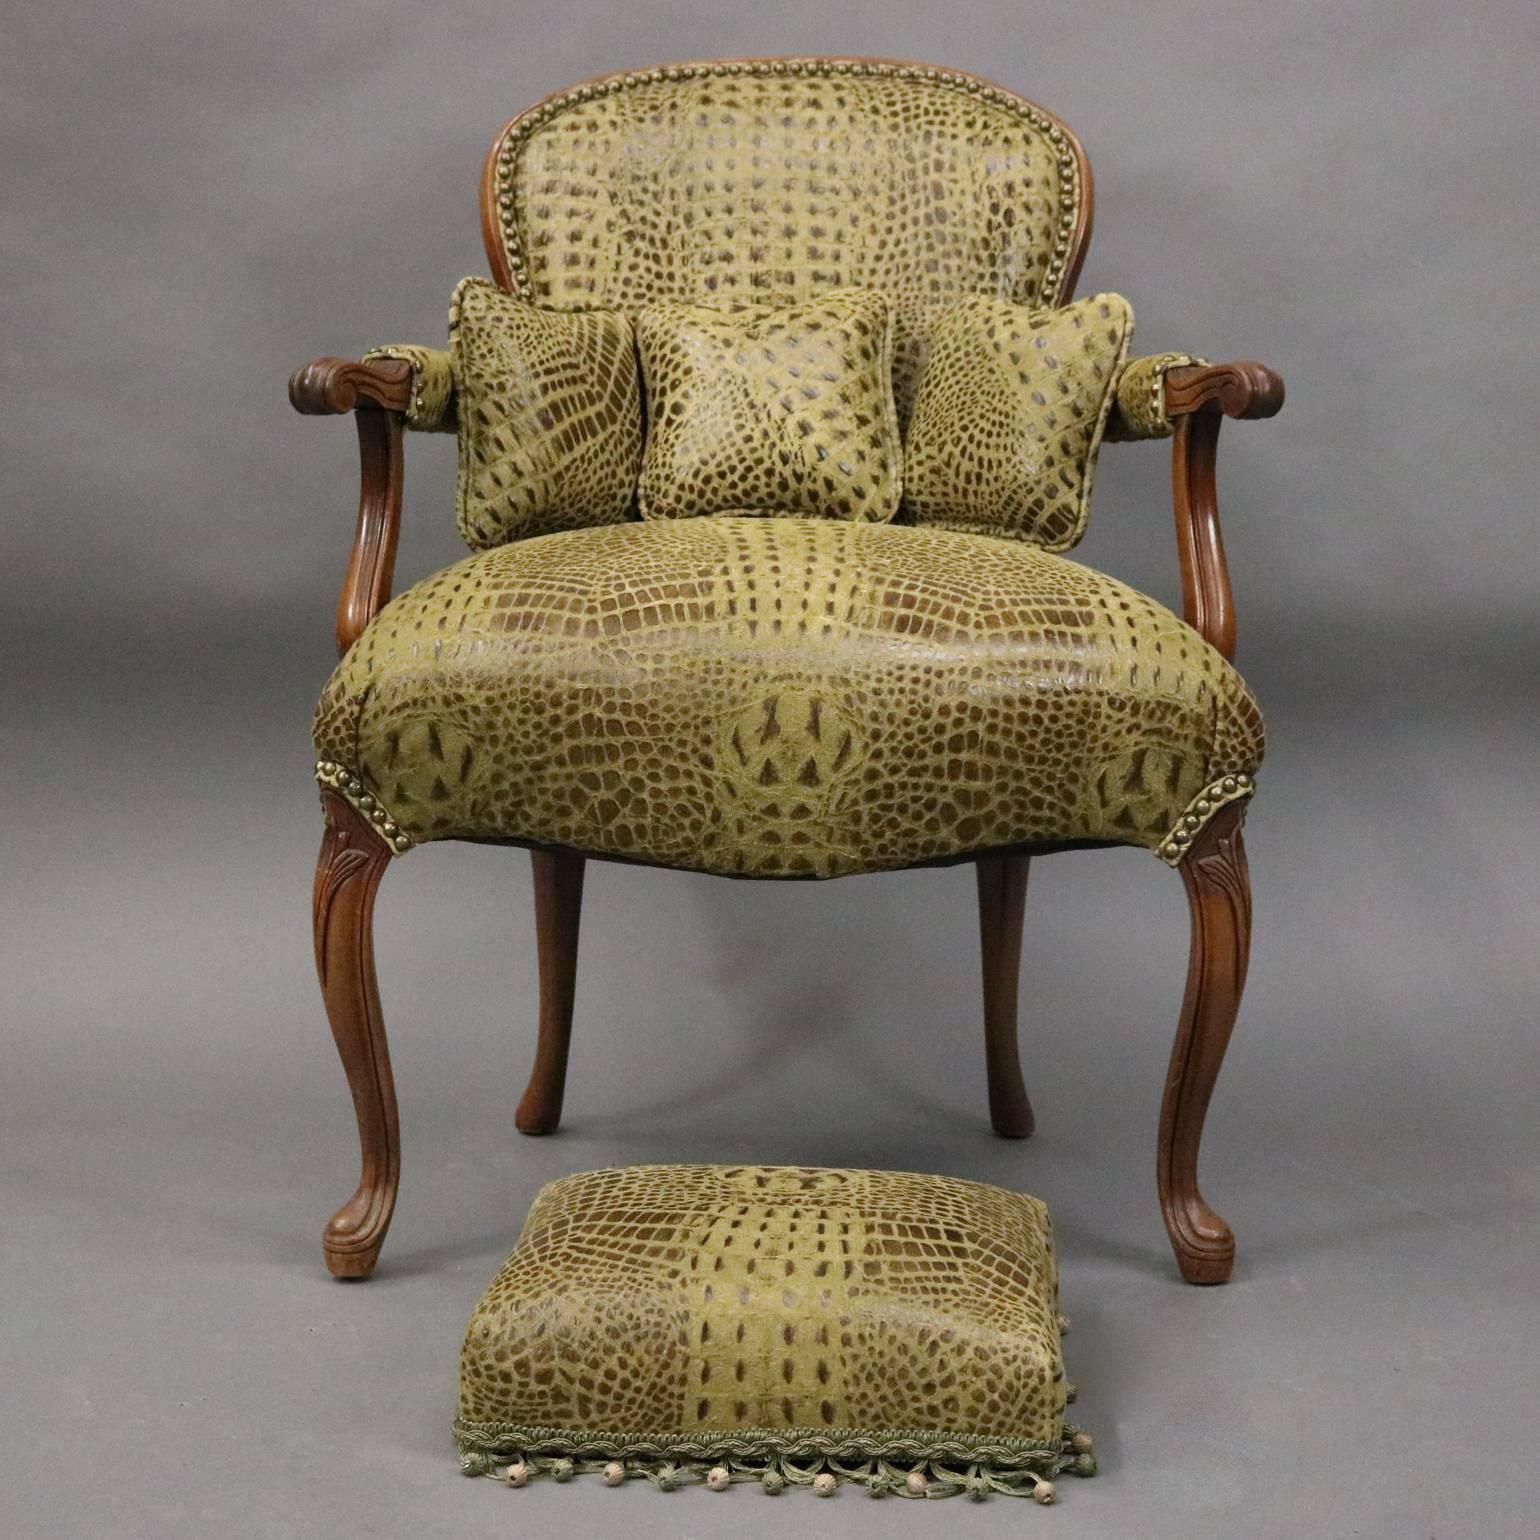 Vintage French Alligator Print Leather Louis XV Style Armchair and Ottoman 1